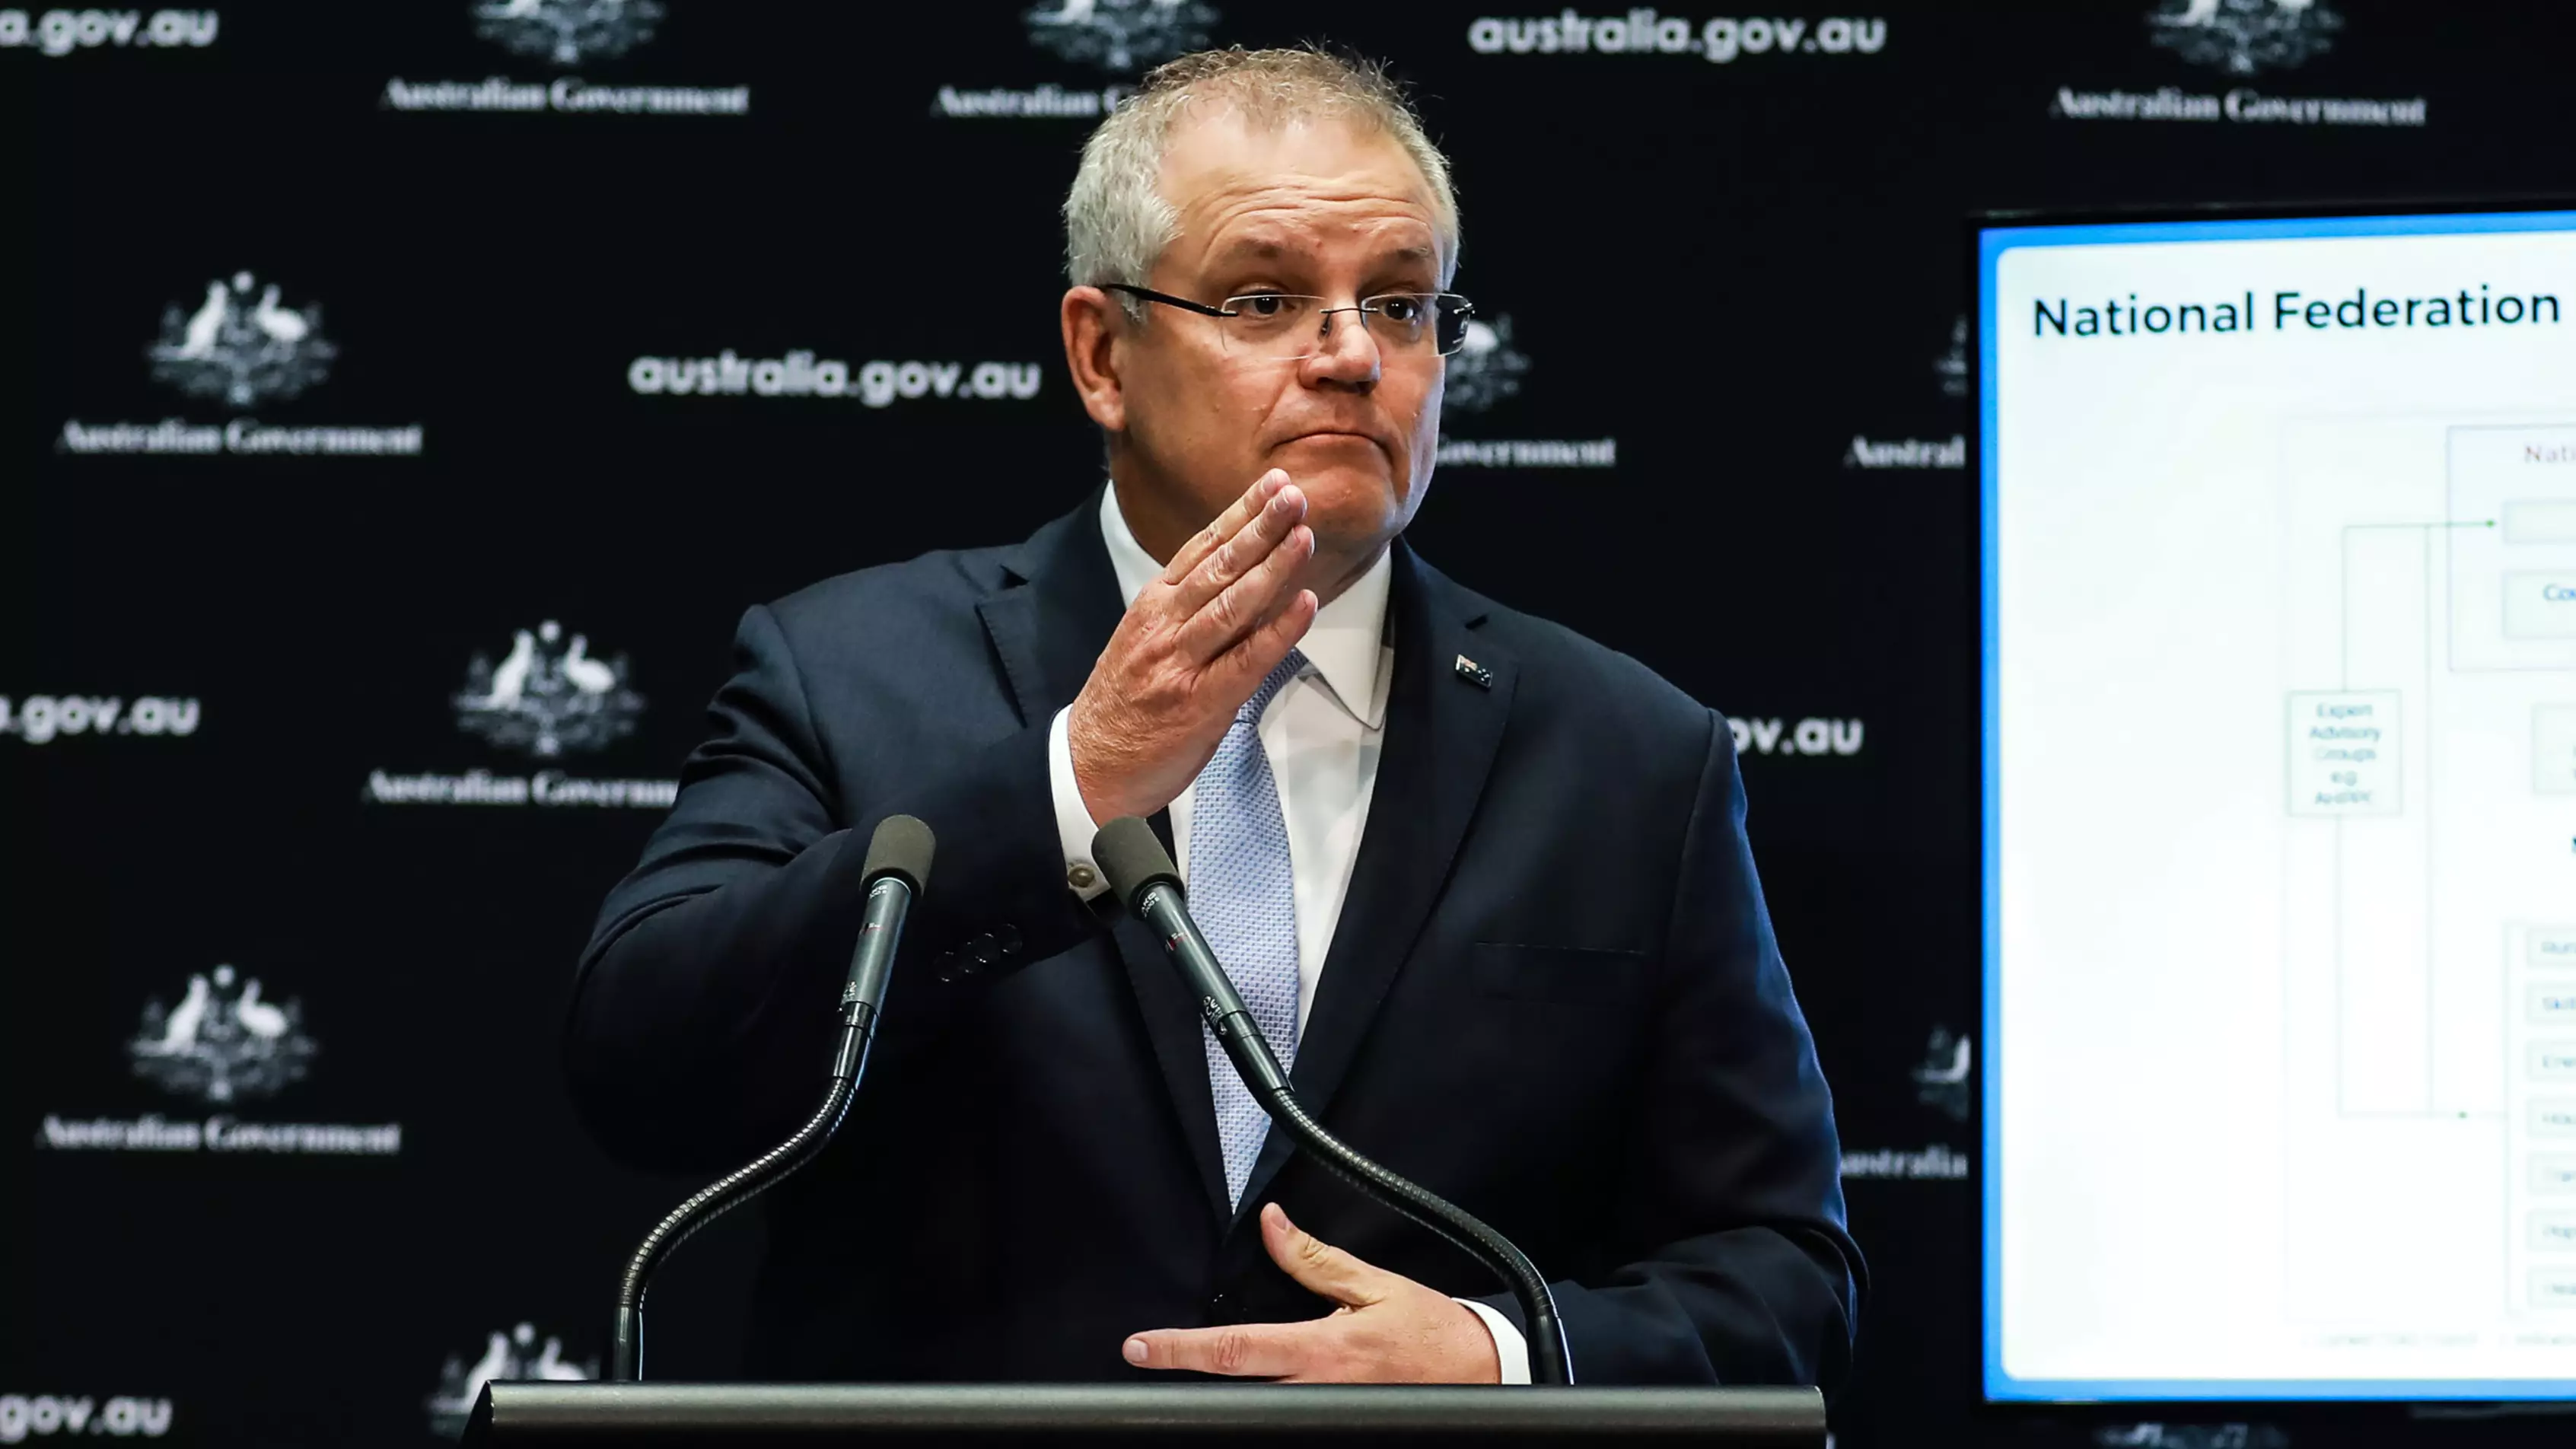 Scott Morrison Believes It's 'Unfair' For People To Blame Him For The Vaccine Rollout